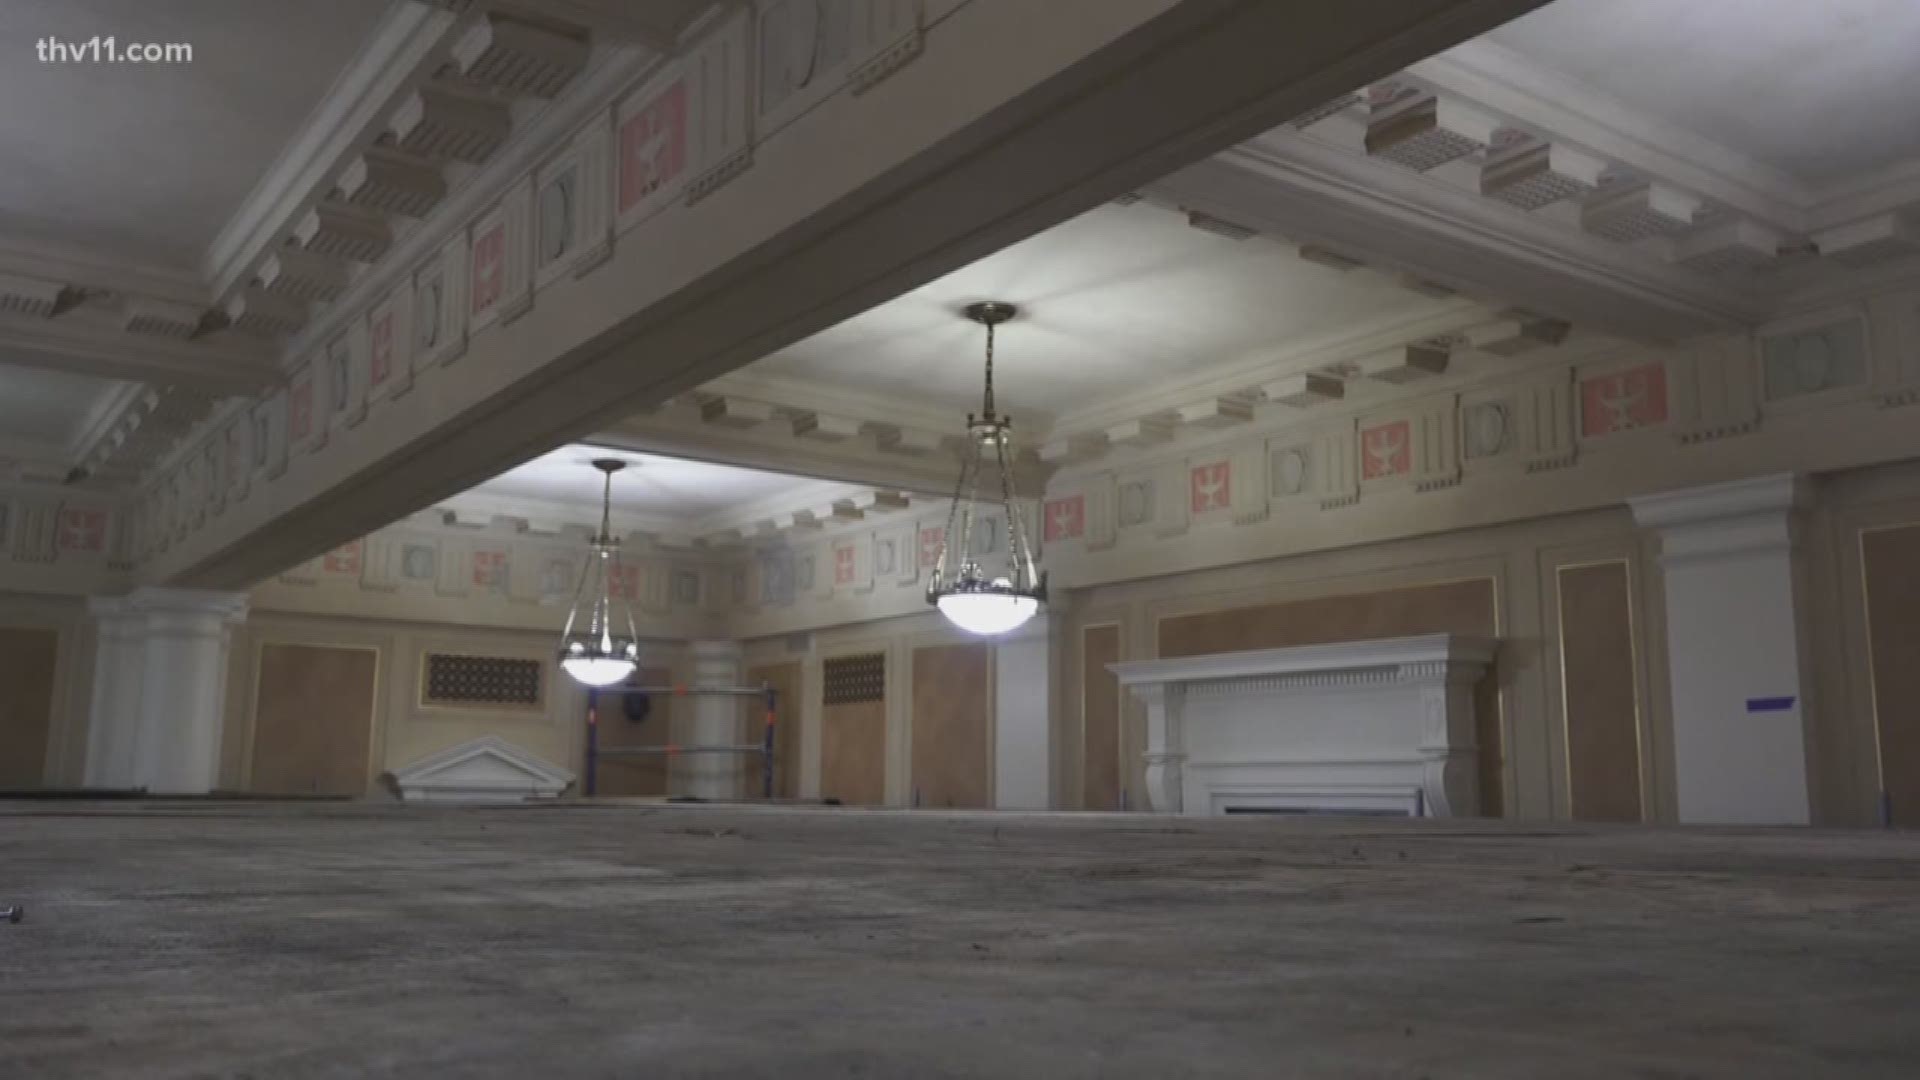 Major restorations are in store for the Arkansas Supreme Court Room in the Arkansas Capitol building.